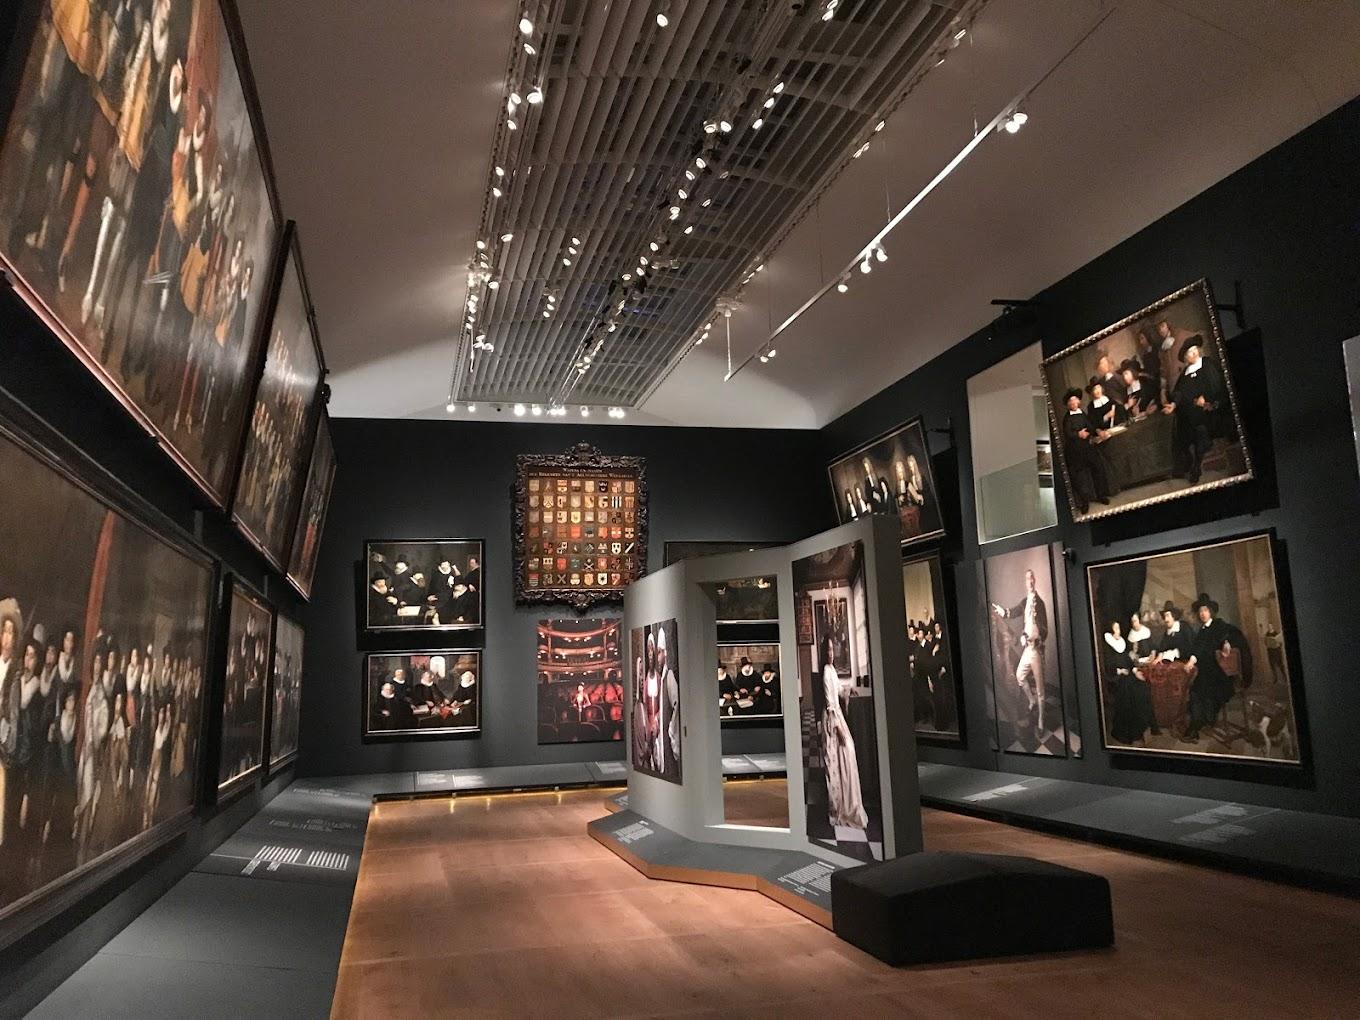 Portrait Gallery of the 17th century | Amsterdam, Netherlands | Art Yourself Atelier